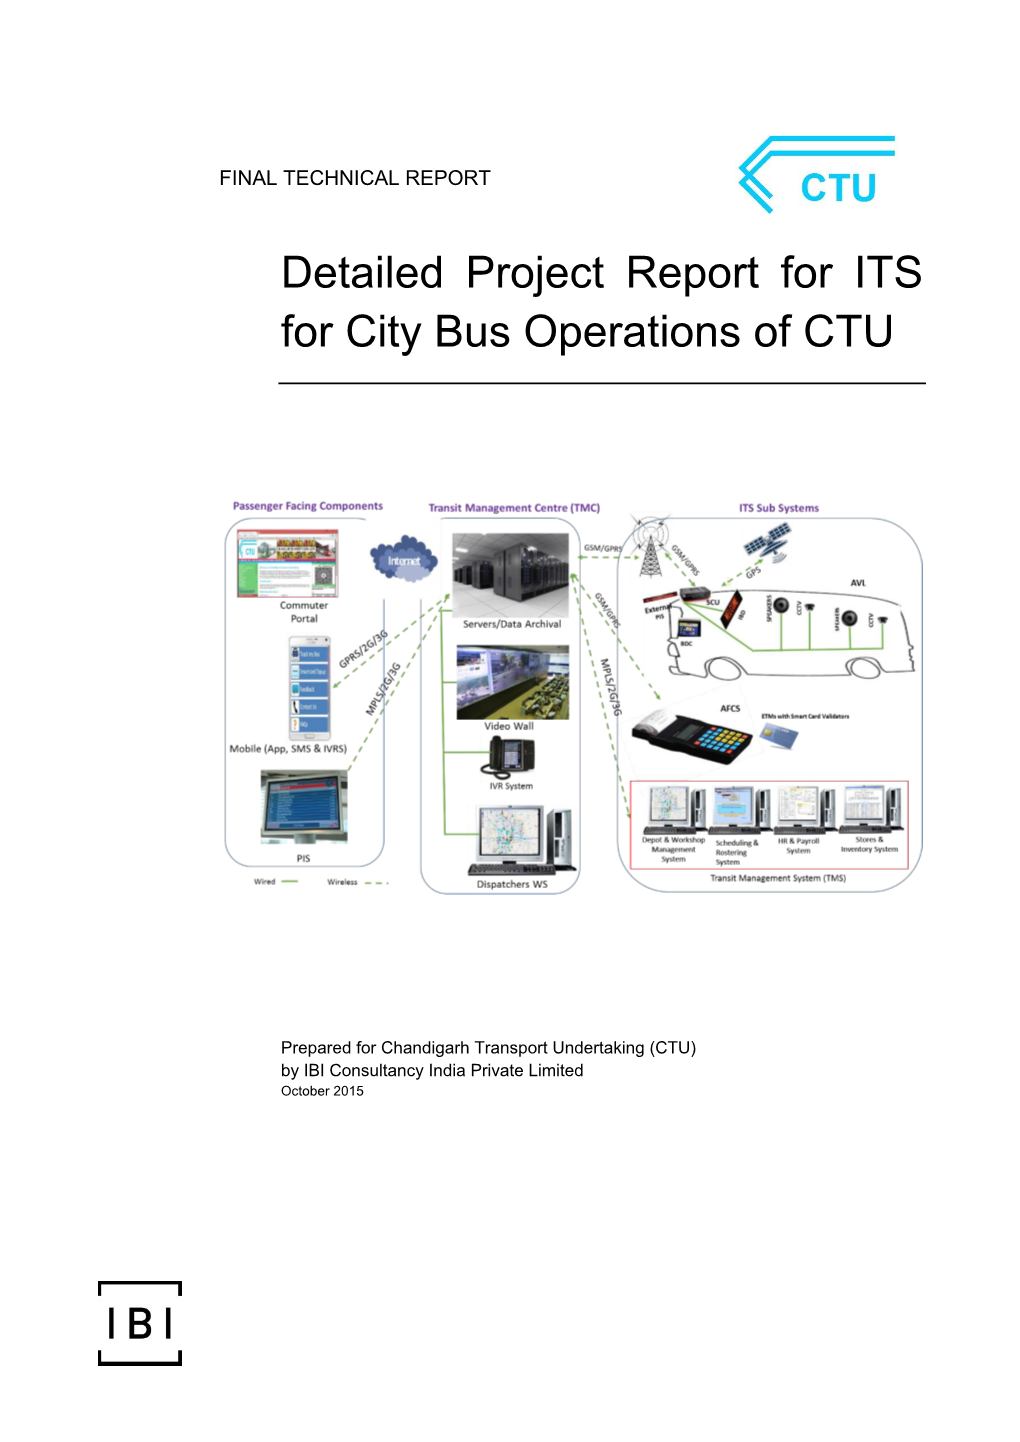 Detailed Project Report for ITS for City Bus Operations of CTU